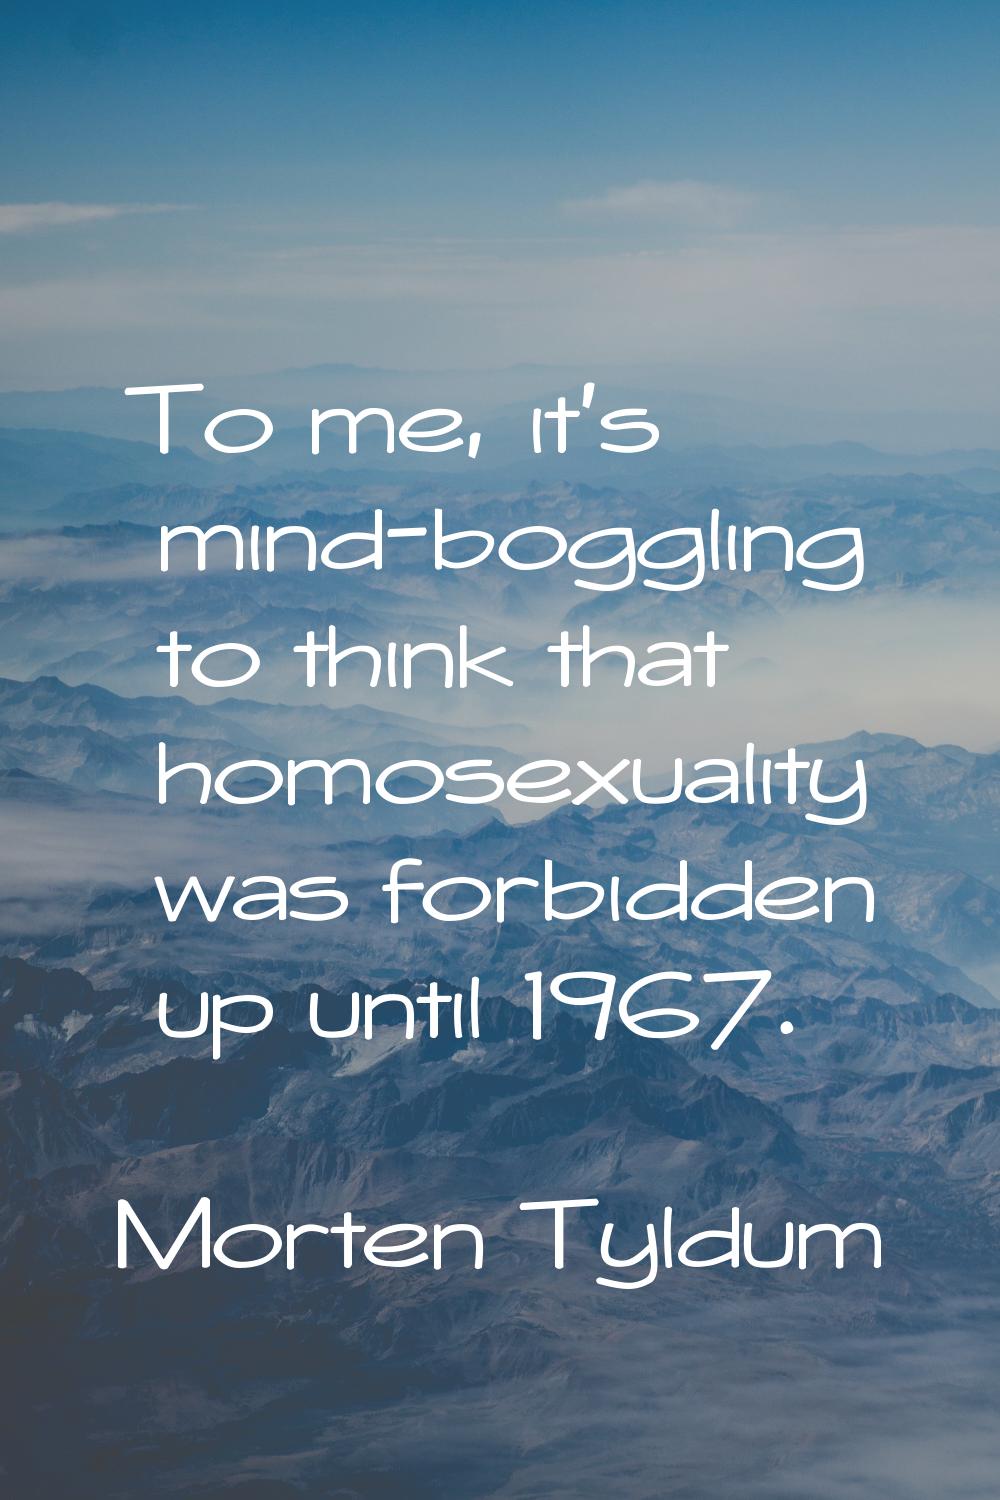 To me, it's mind-boggling to think that homosexuality was forbidden up until 1967.